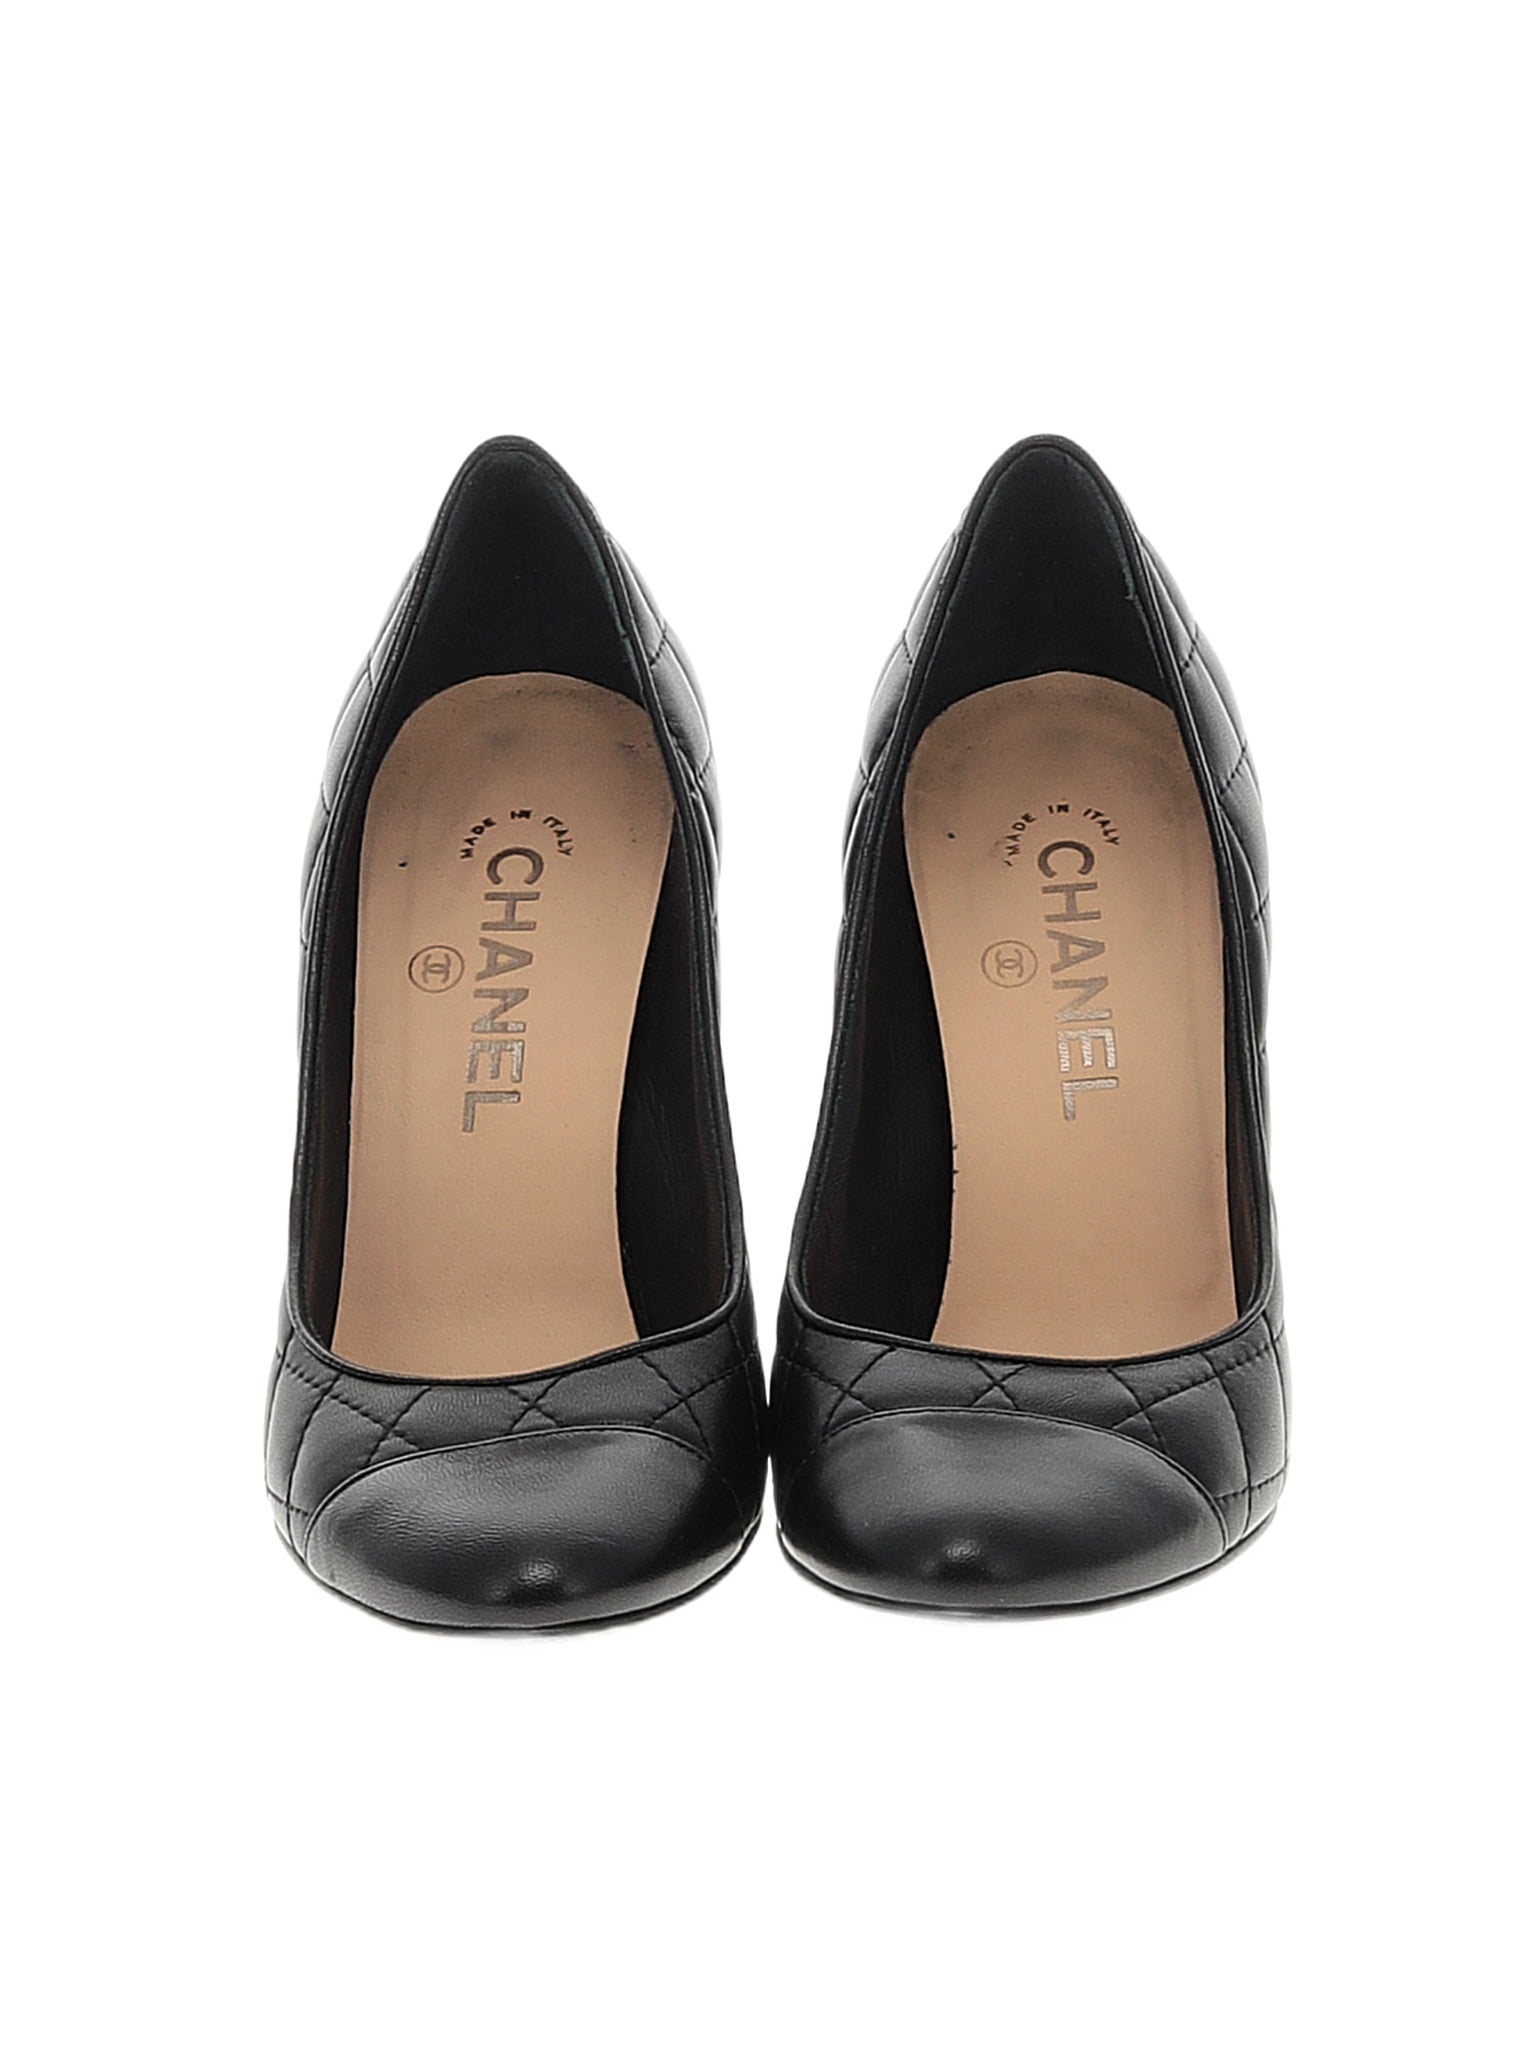 Chanel Women's Shoes On Sale Up To 90% Off Retail